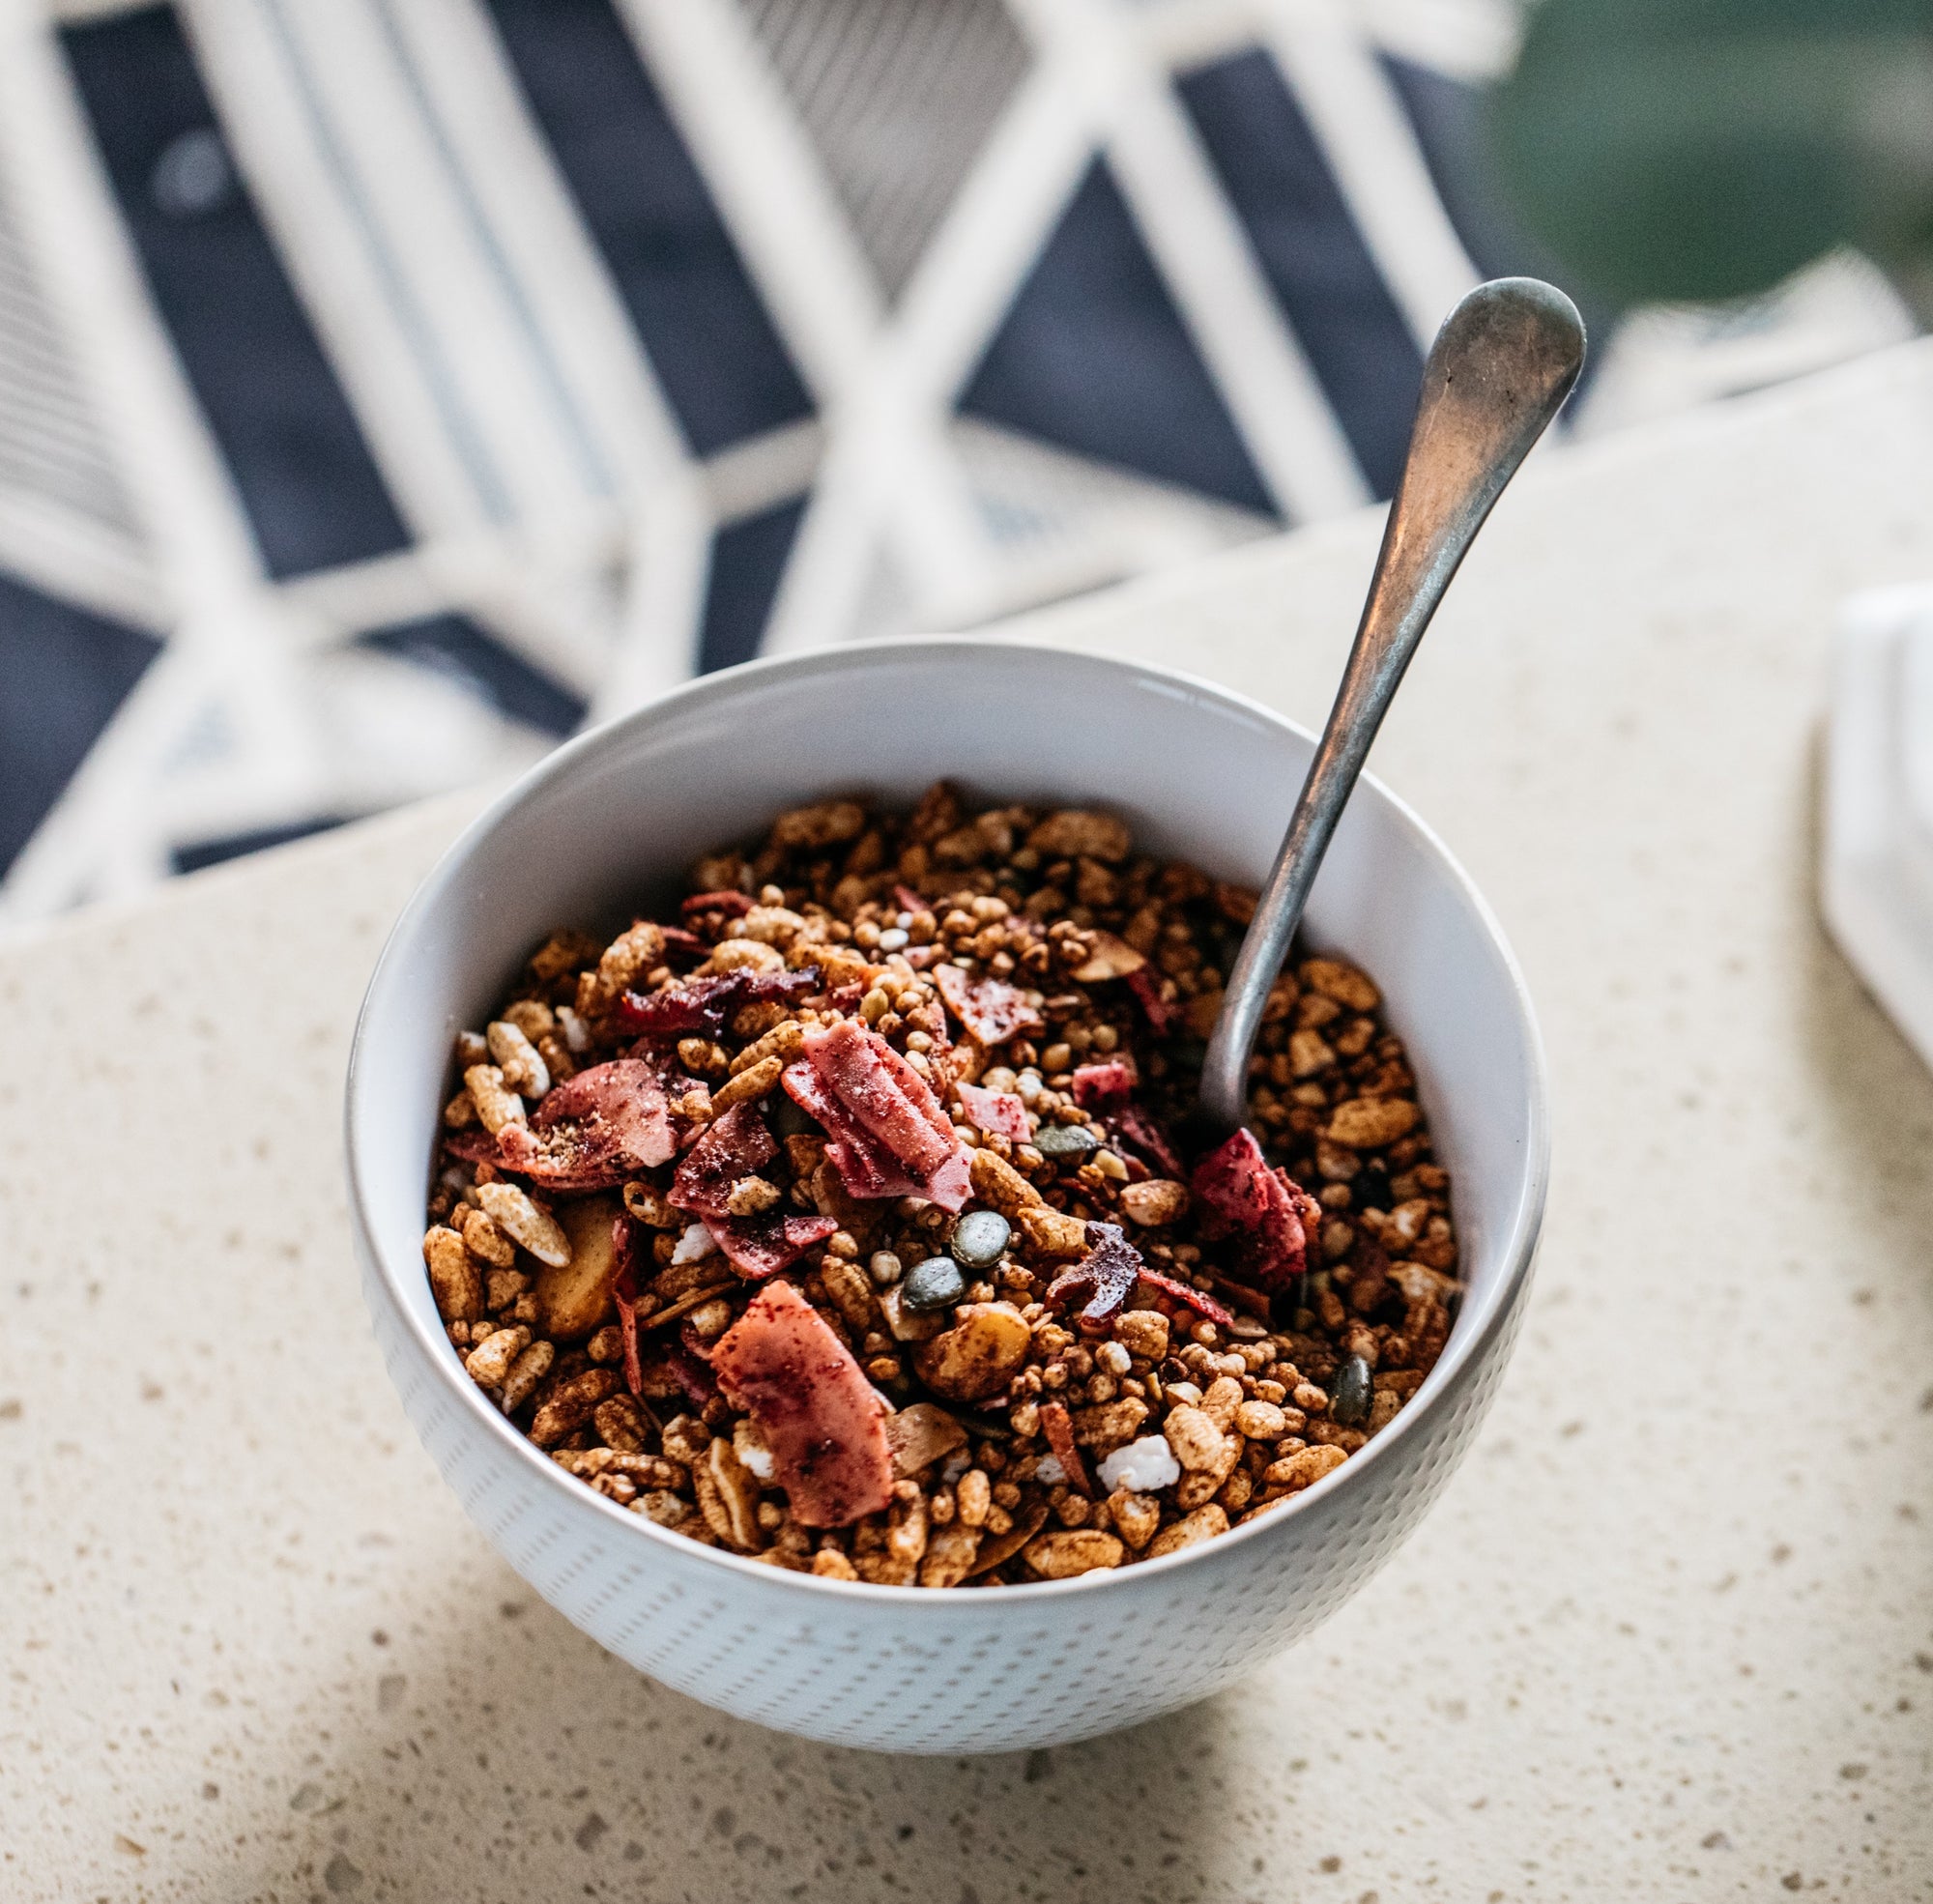 Say G’day to our Sour Plum, Coconut & Macadamia Granola